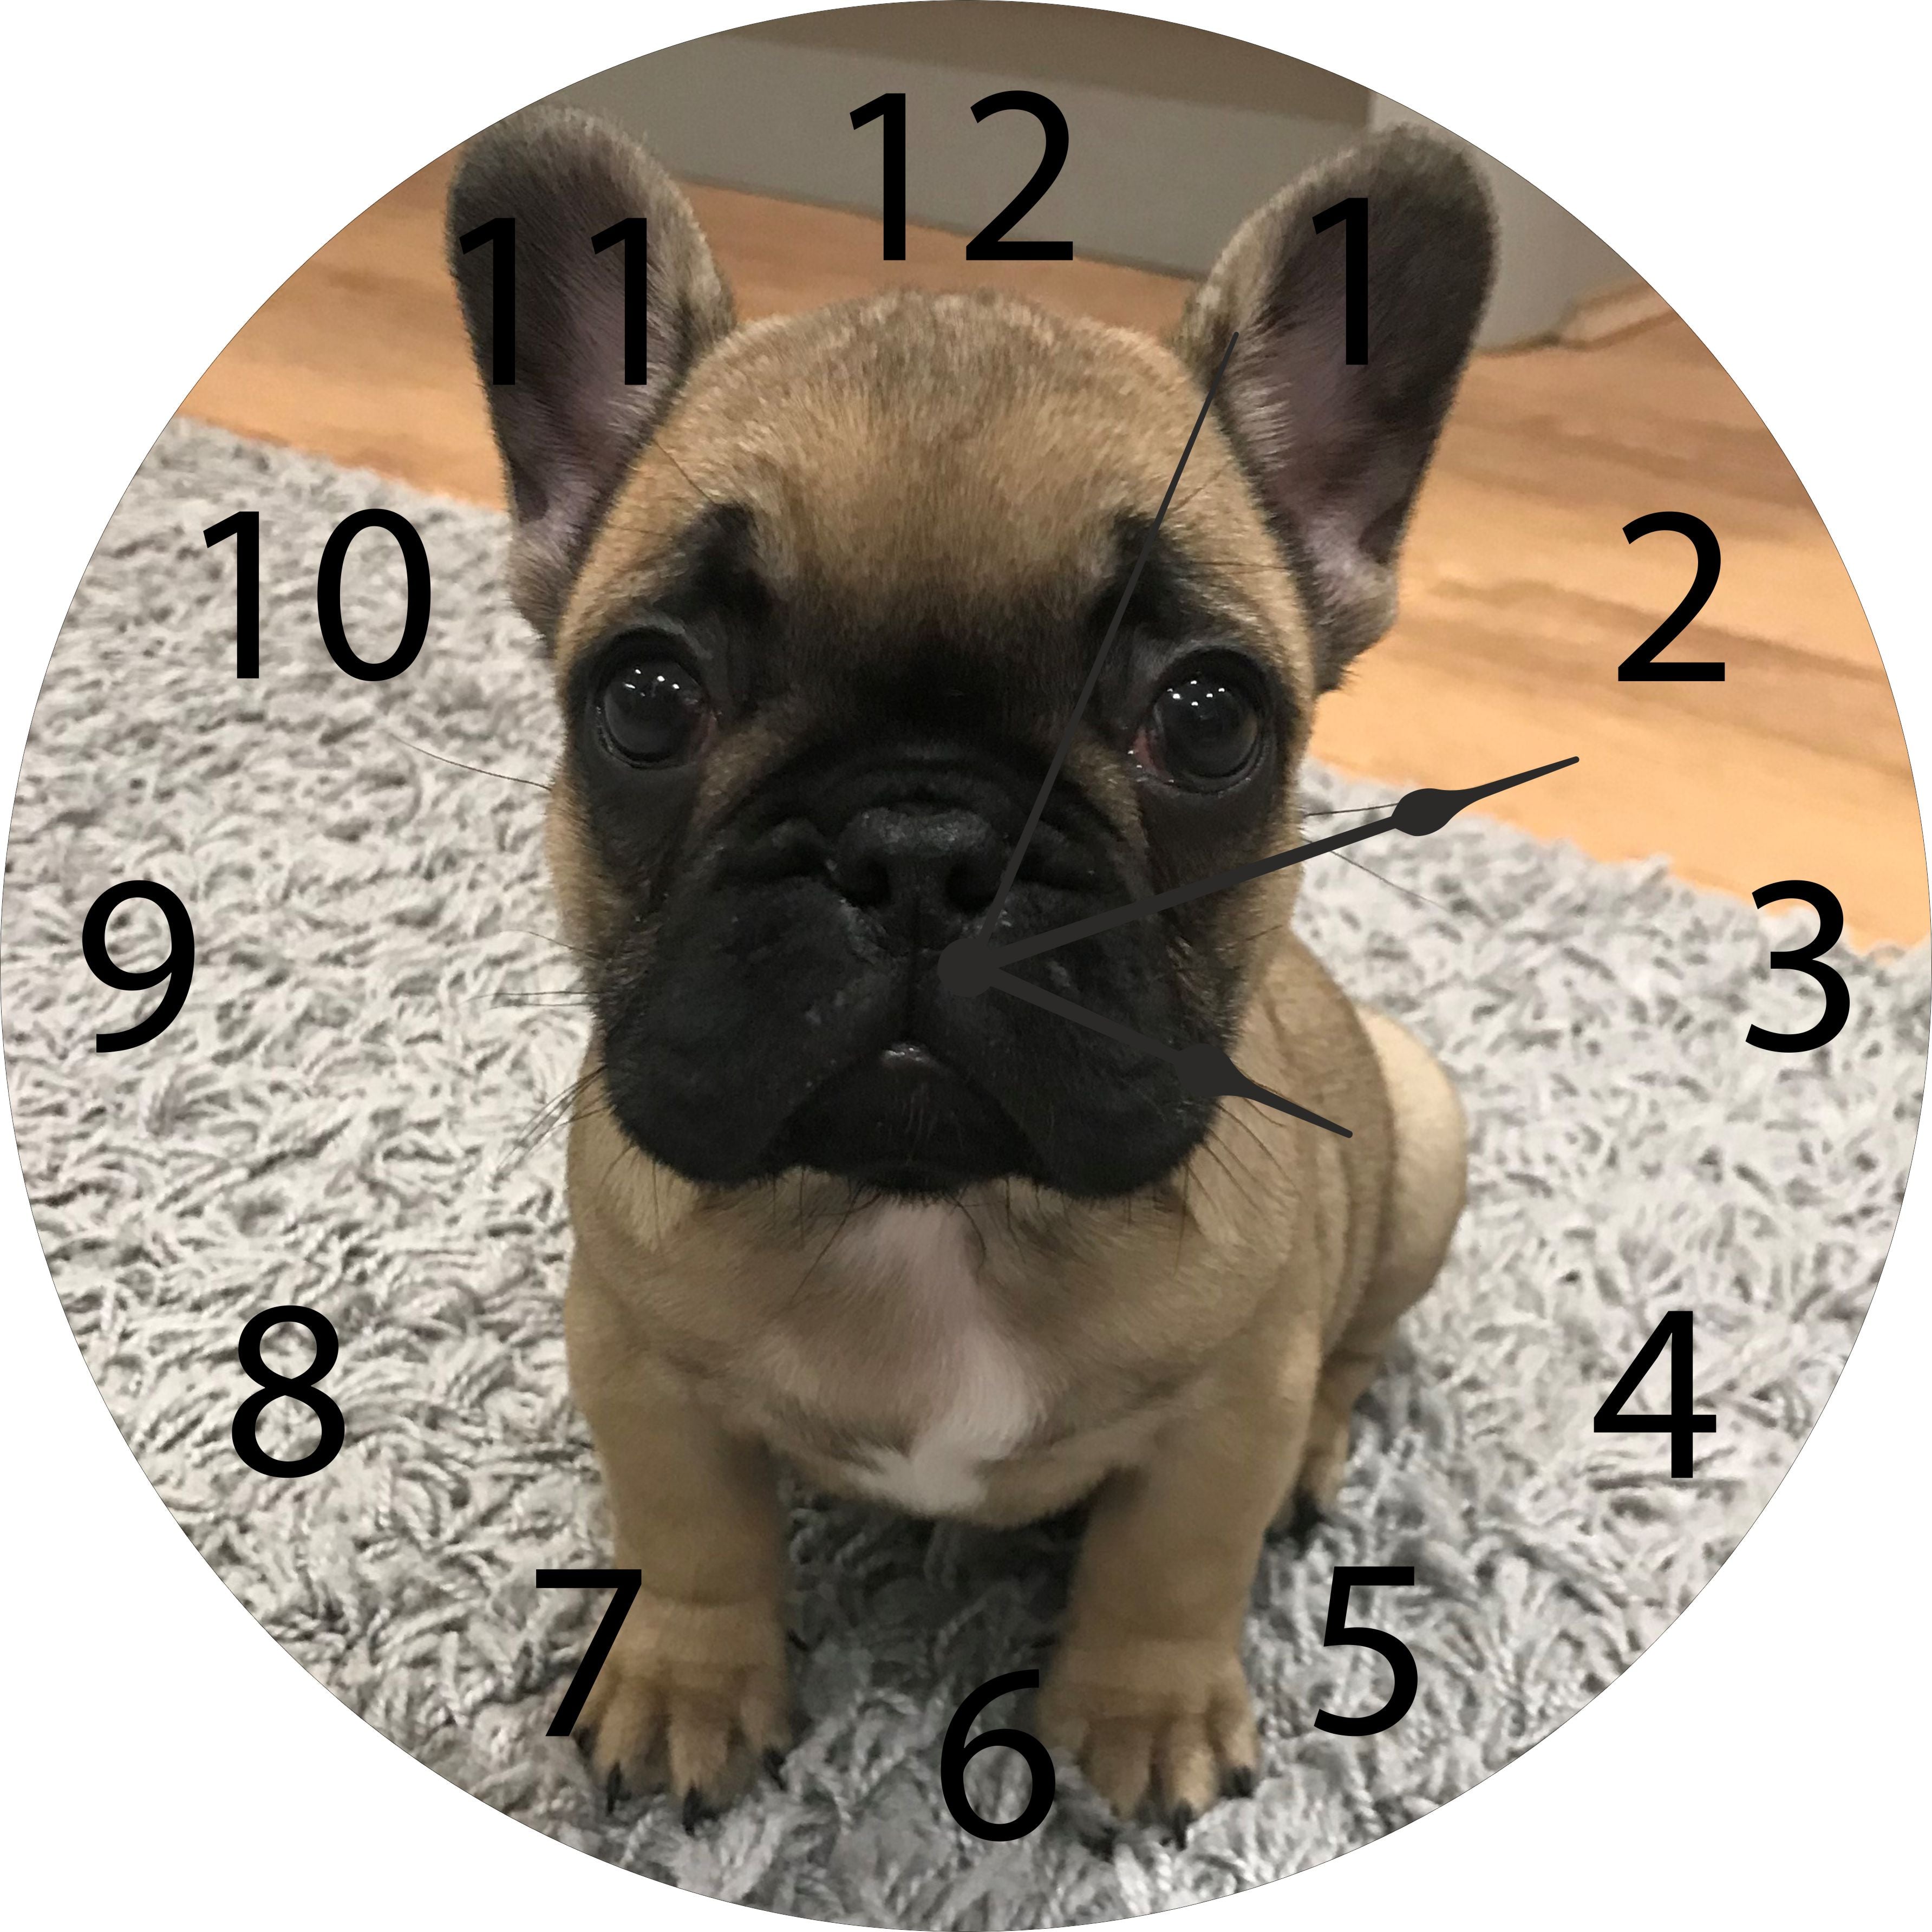 Photo Clock - Your Image Printed on the Clock - Size 30cm Circle with Numbers - Family, Pets, Cars - Unique Personalised Special Gift